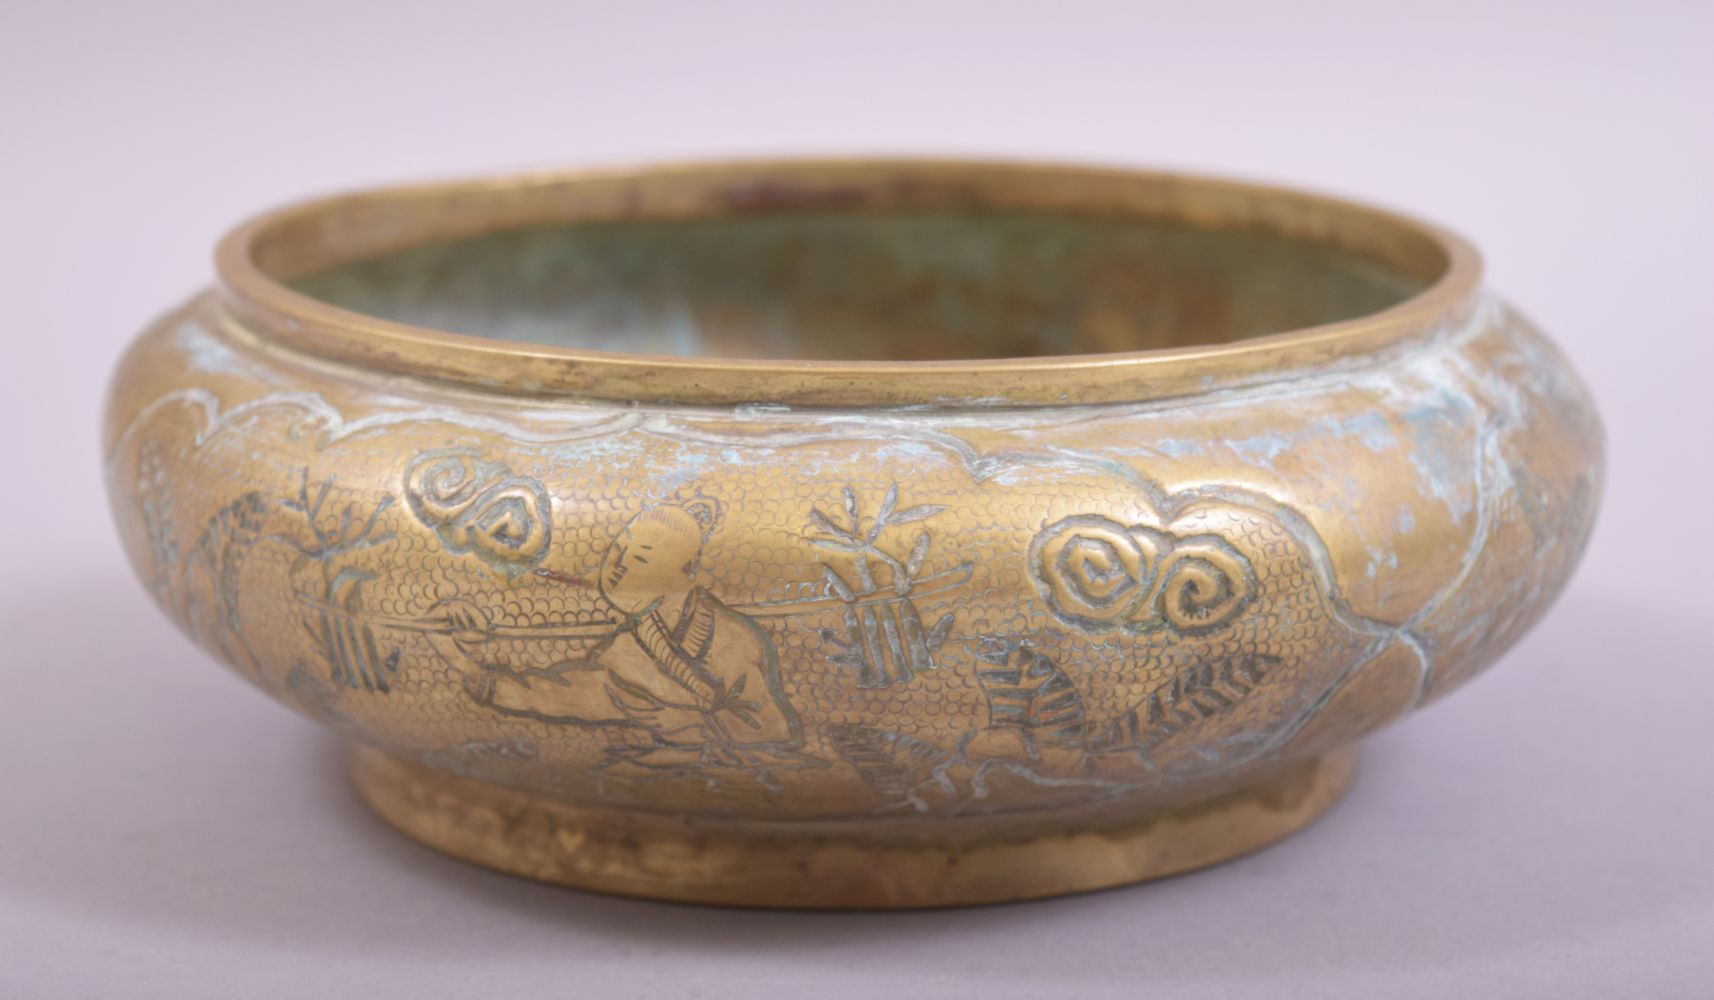 A CHINESE EMBOSSED AND CHASED BRONZE BOWL, with scenes of men on horseback in outdoor settings,